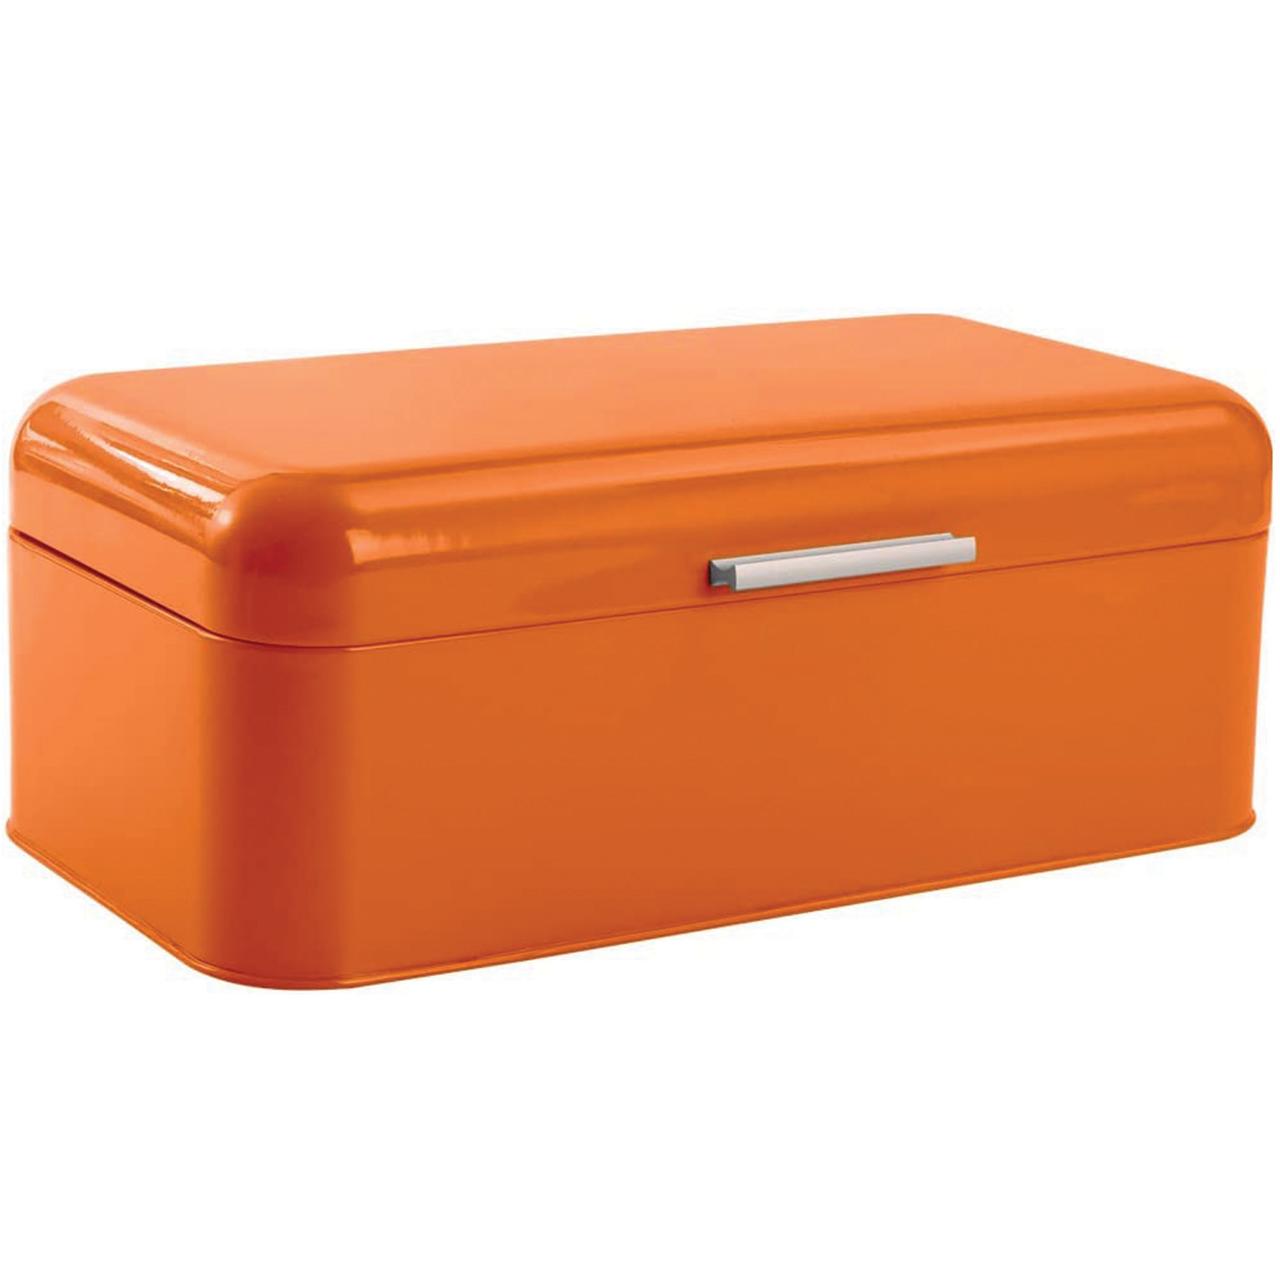 Culinary Couture Stainless Steel Bread Box for Kitchen Countertop Metal Storage Container Orange - image 1 of 8